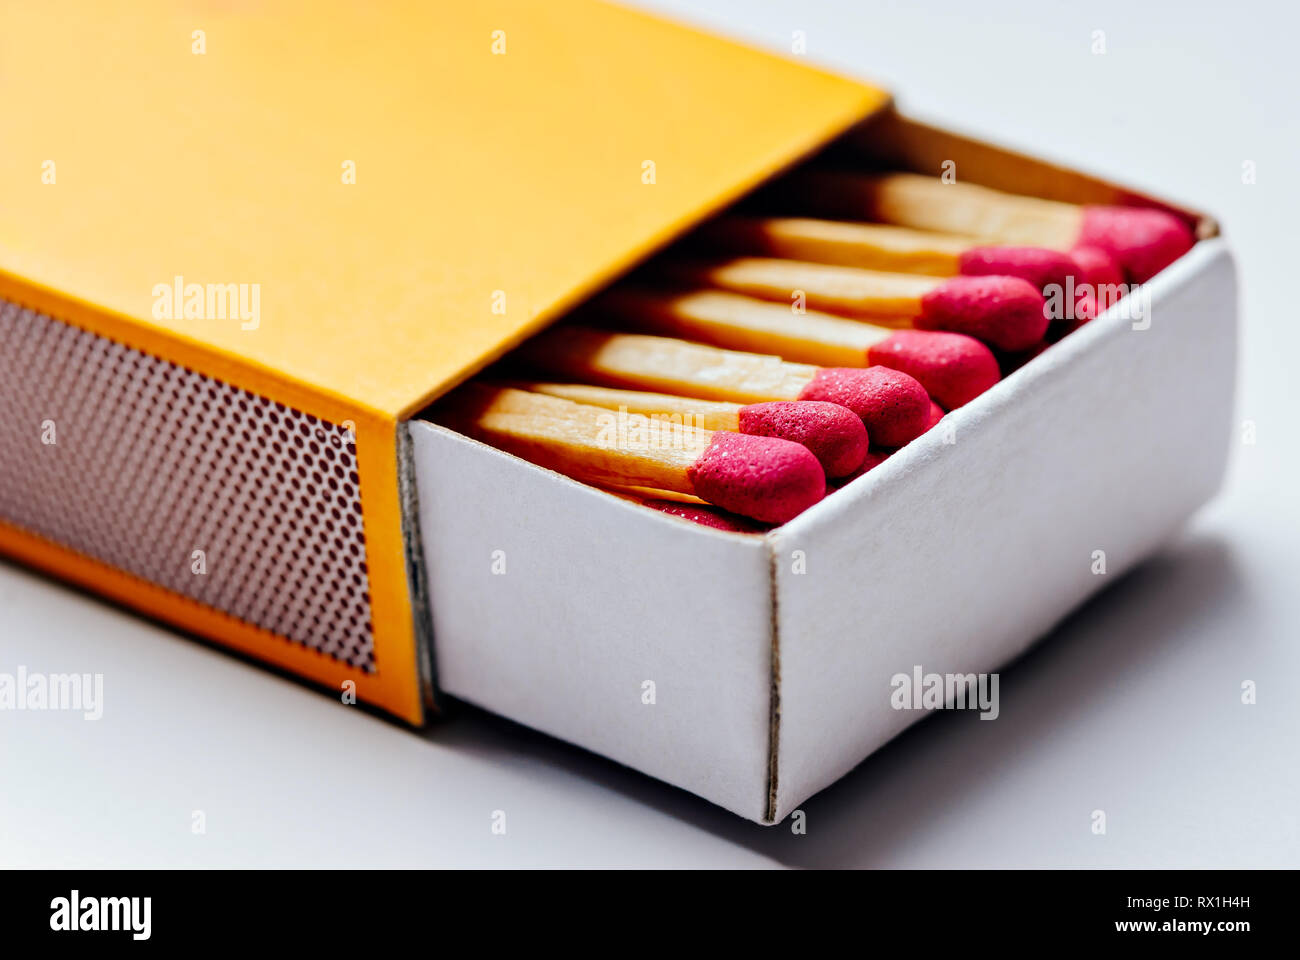 Download Brand New Open Yellow Matchbox With Many Pink Match Sticks In It Stock Photo Alamy Yellowimages Mockups